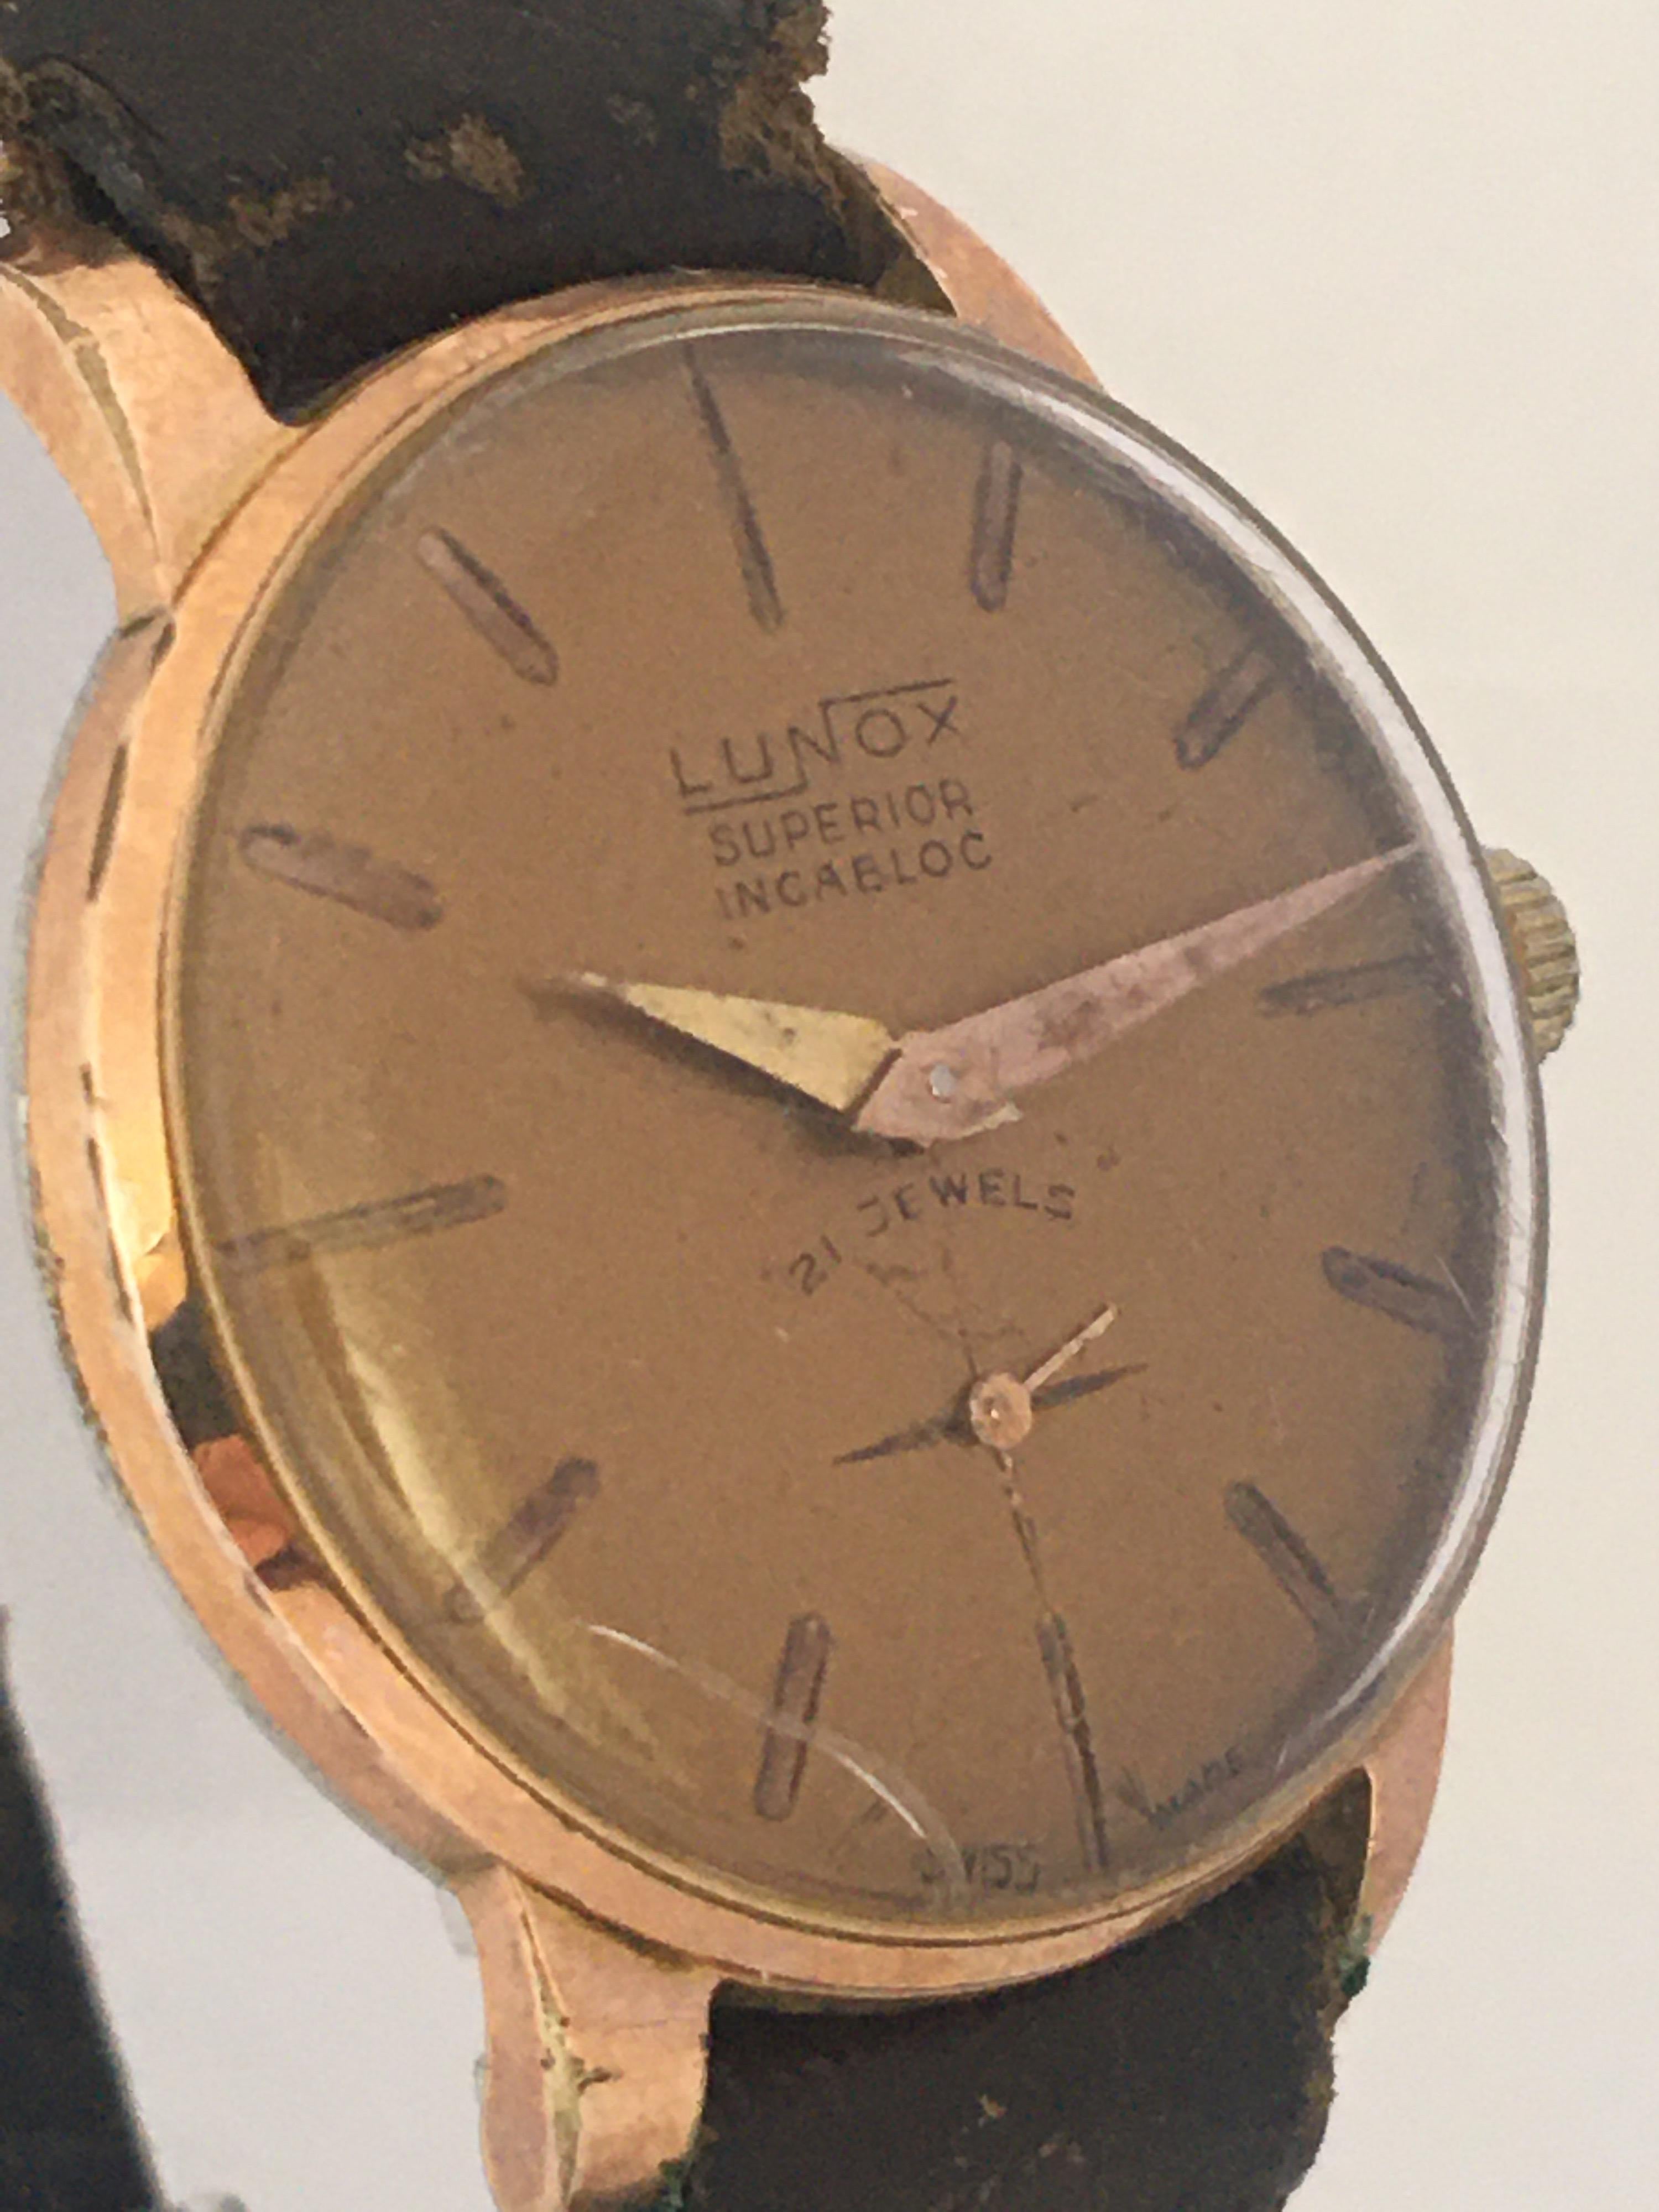 This beautiful pre-owned vintage hand-winding ladies watch is working and ticking well. Visible signs of ageing and wear with scratches on the glass and on the gold plated watch case. There is a small crack on the glass as shown. Some tarnishes on